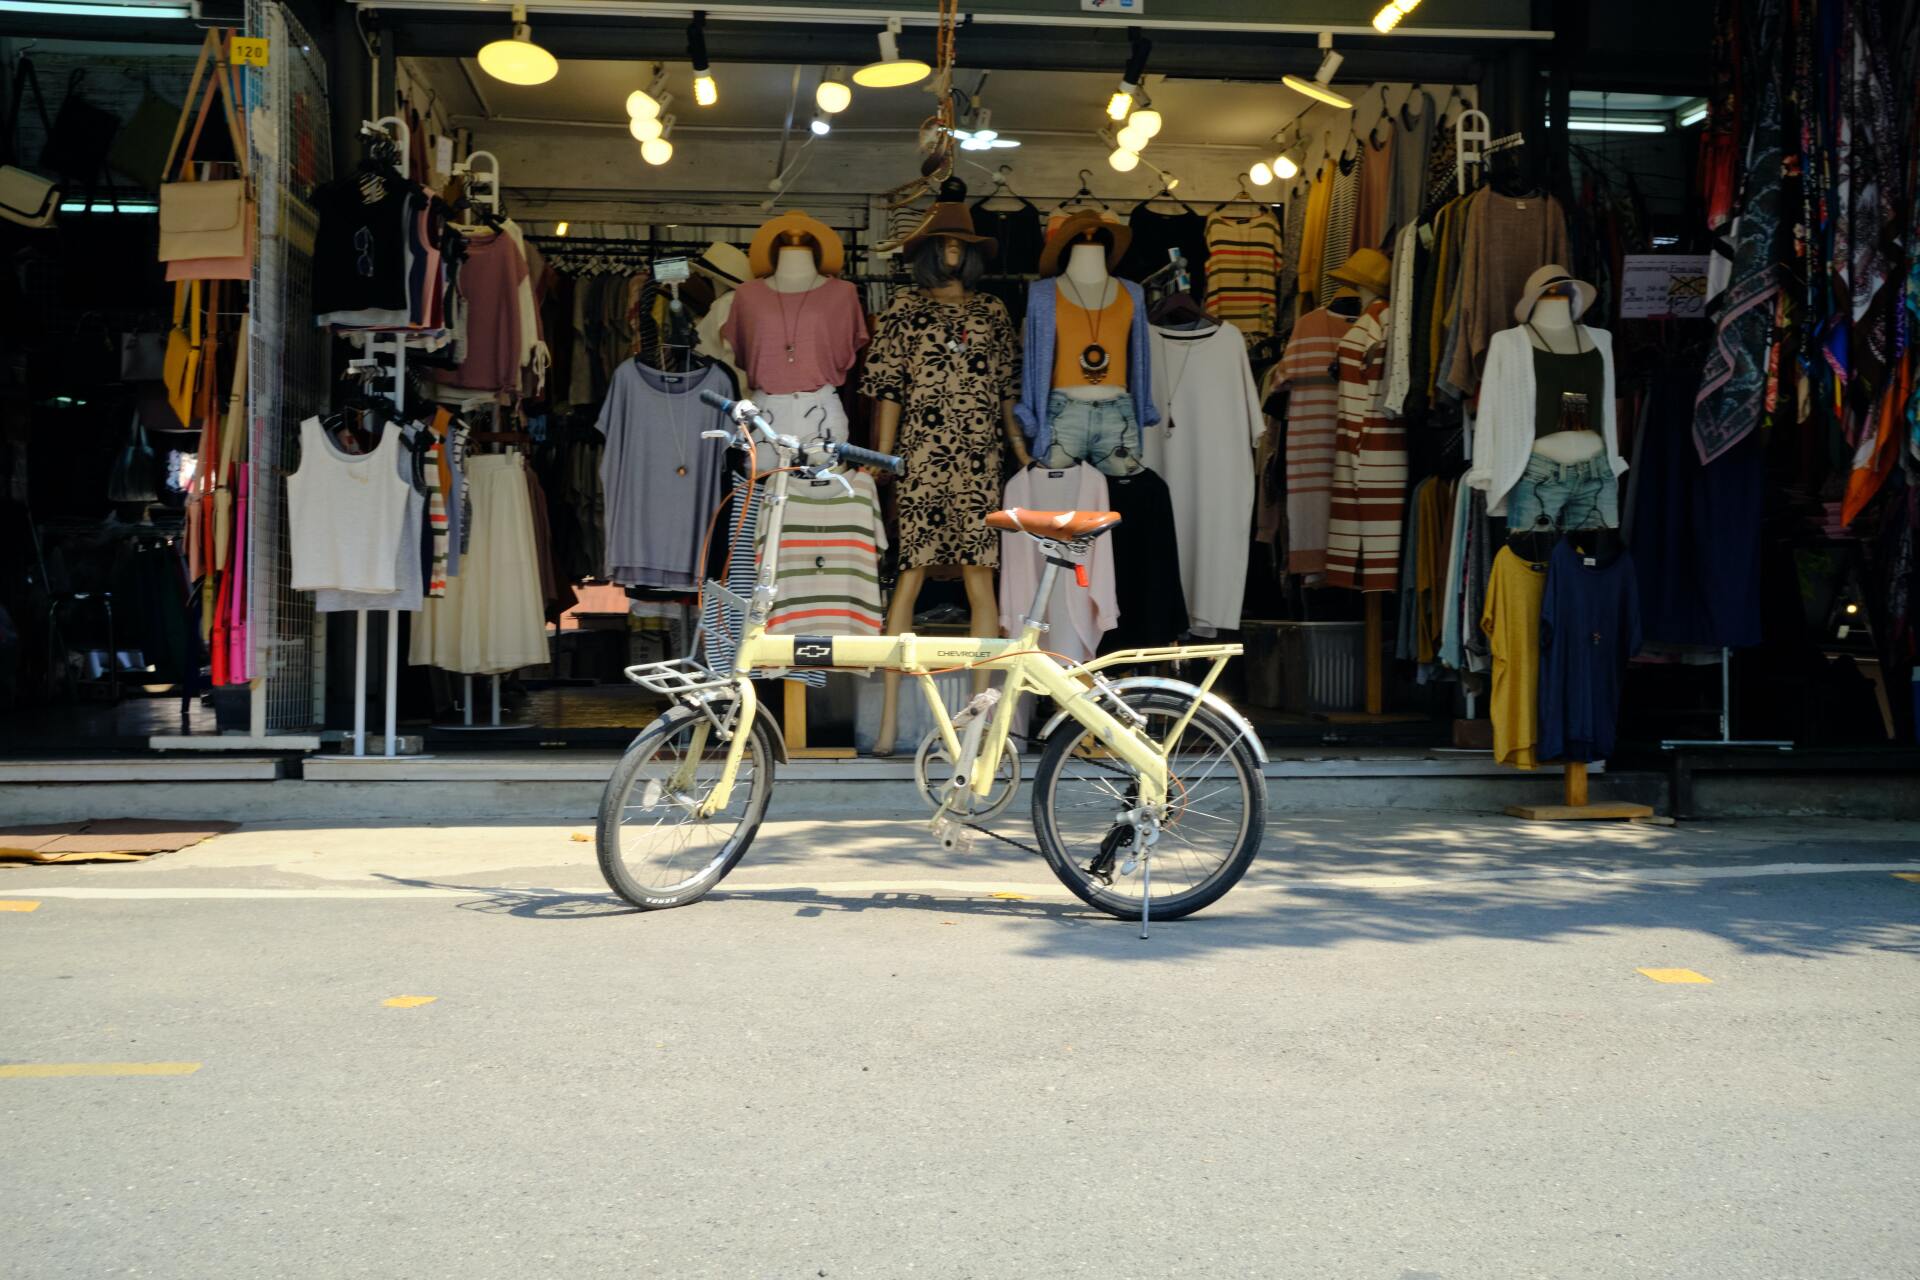 A yellow bicycle is parked in front of a clothing store.